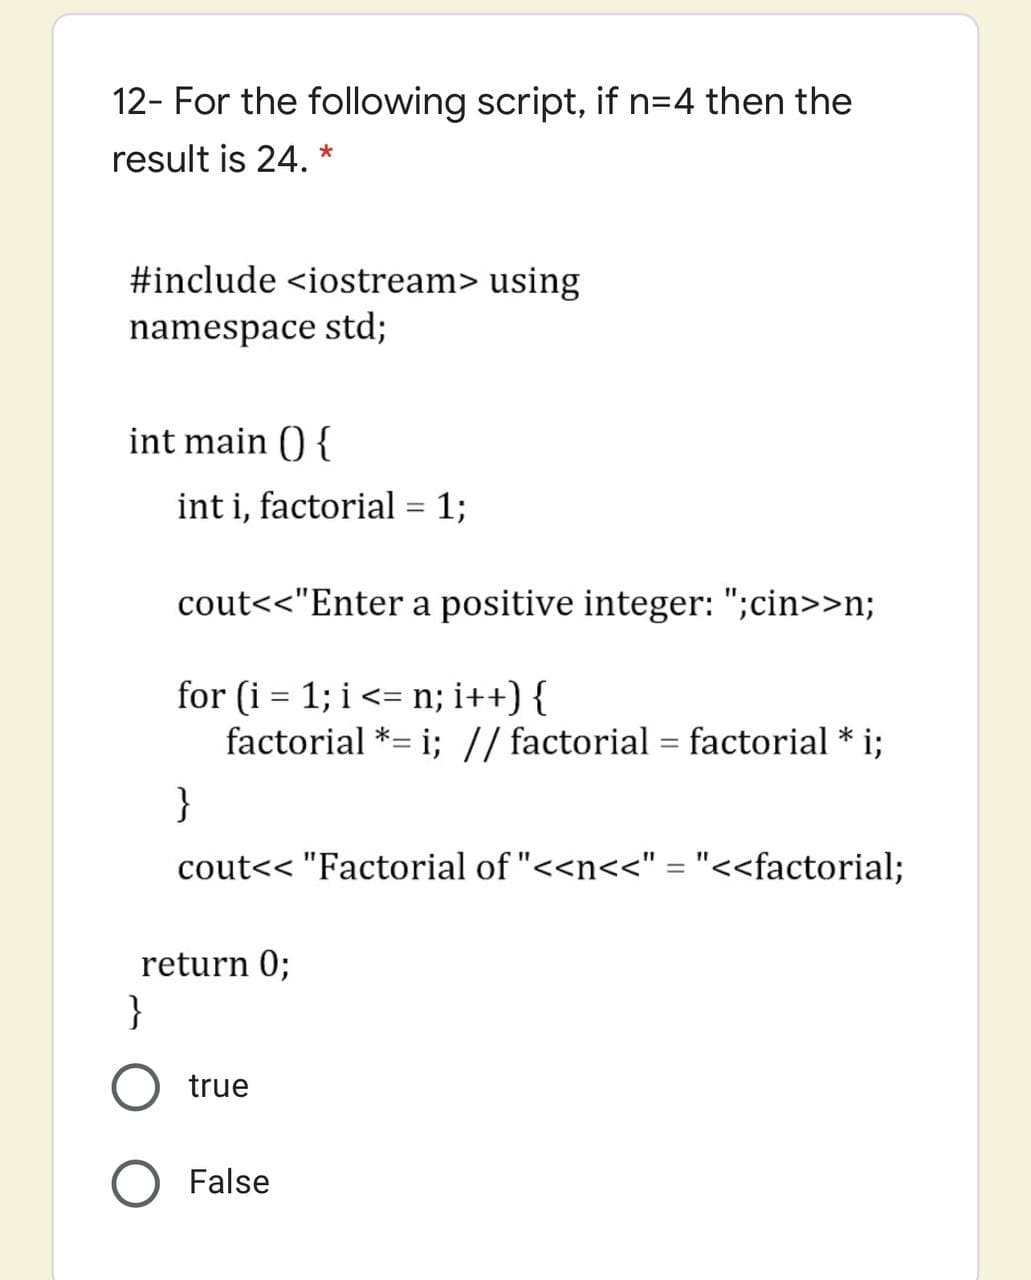 12- For the following script, if n=4 then the
result is 24. *
#include <iostream> using
namespace std;
int main () {
int i, factorial = 1;
cout<<"Enter a positive integer: ";cin>>n;
for (i = 1; i<= n; i++) {
factorial *= i; // factorial = factorial * i;
%3D
}
cout<< "Factorial of "<<n<<" = "<<factorial;
return 0;
}
true
False
